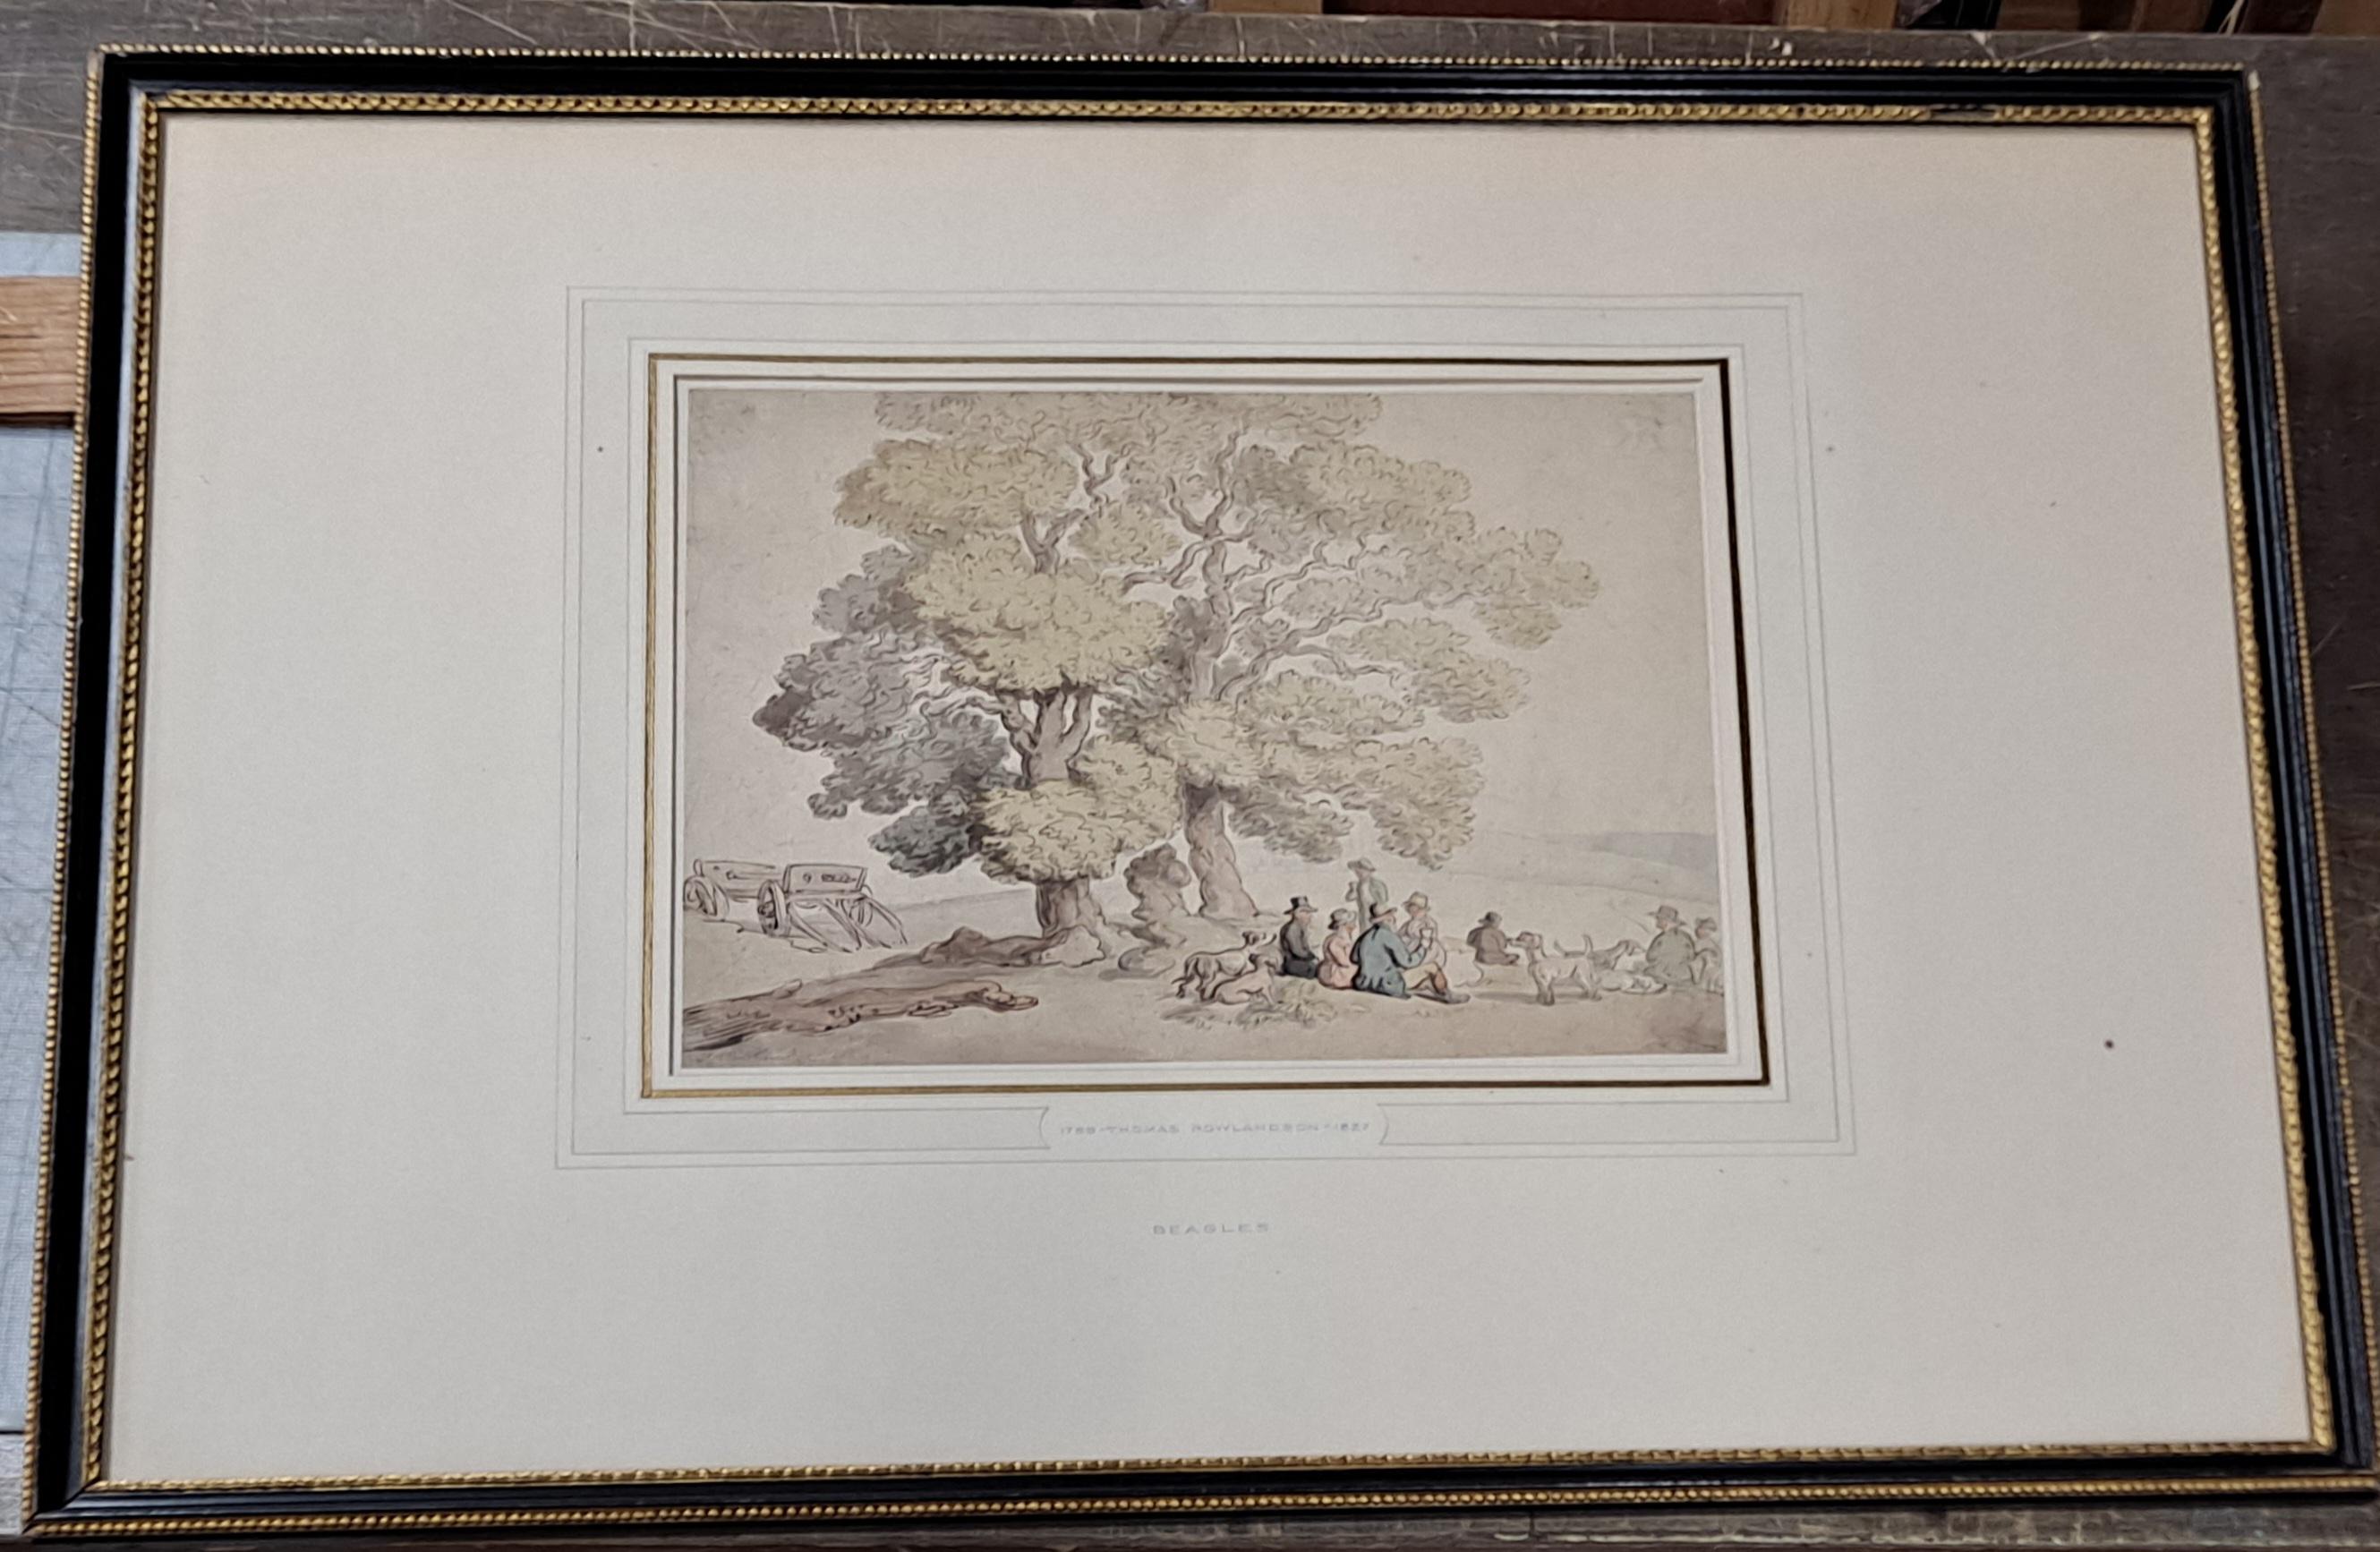 Thomas Rolandson (English, 1756-1829) "Beagles" Watercolor from David Rockefeller's Collection

Unframed 9" x 11"

Framed 19" x 24"